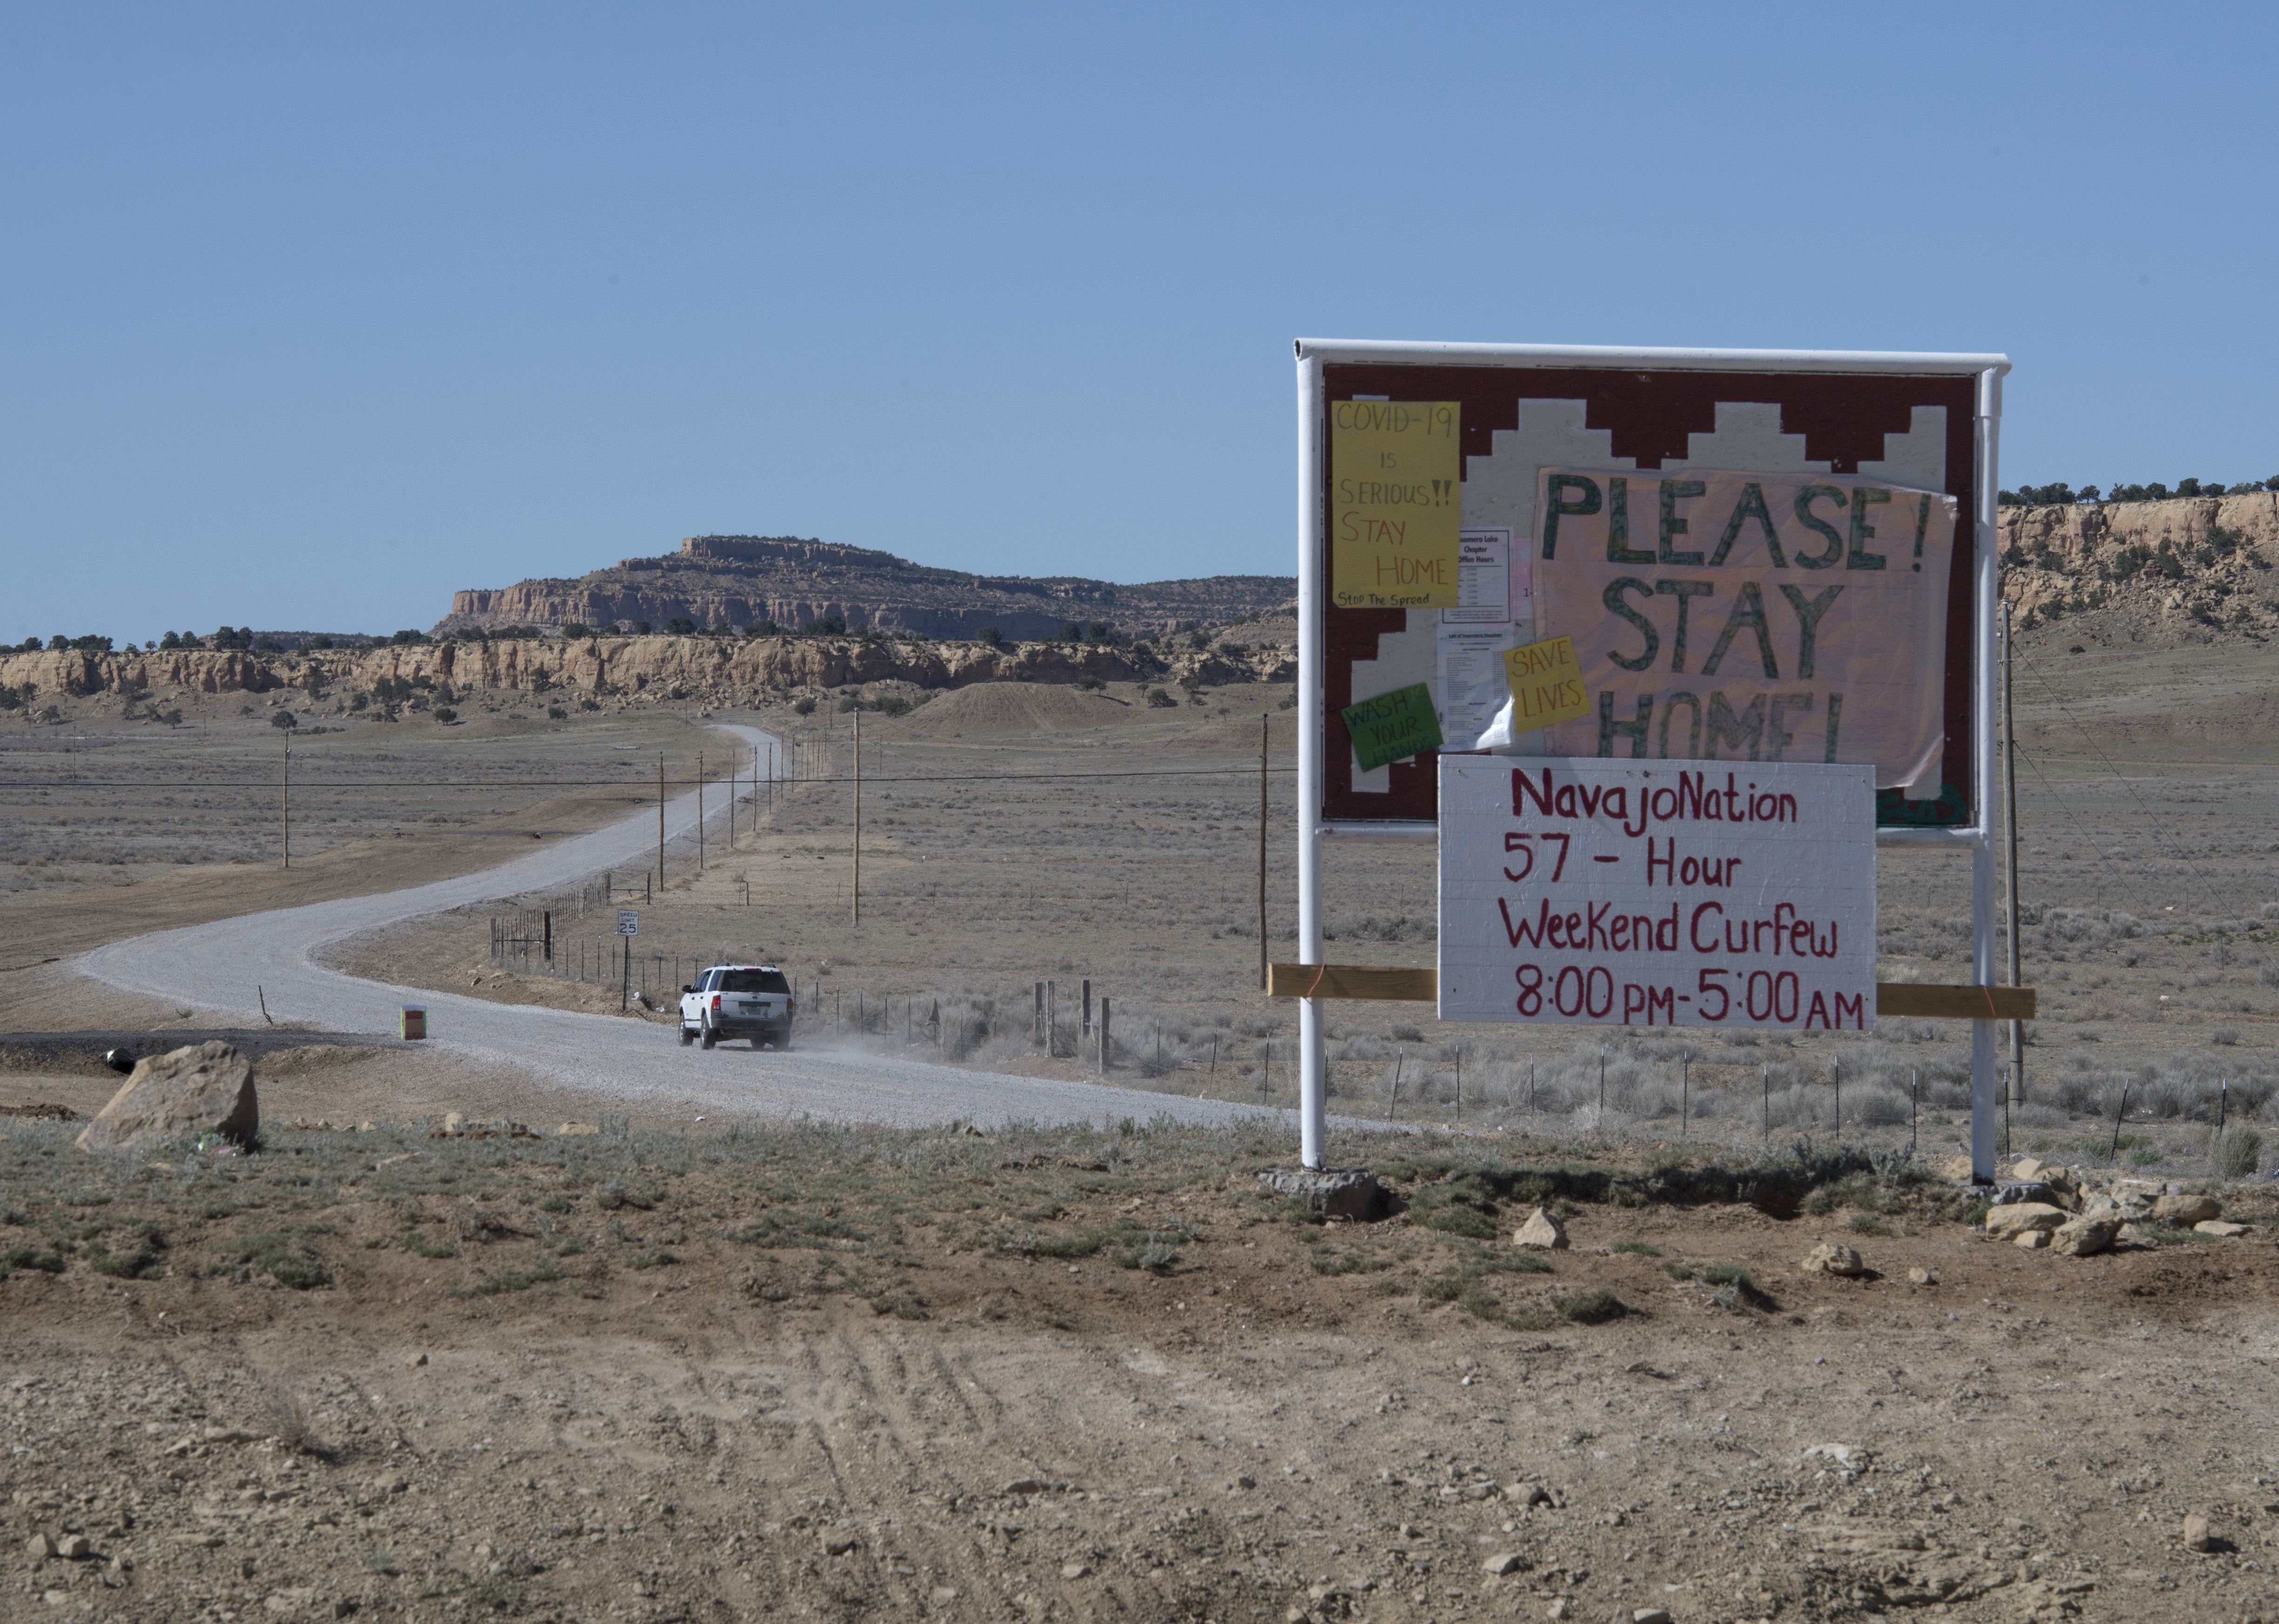 Signs seen on May 20 near Prewitt, New Mexico, alert the Navajo Nation community to a weekend curfew.